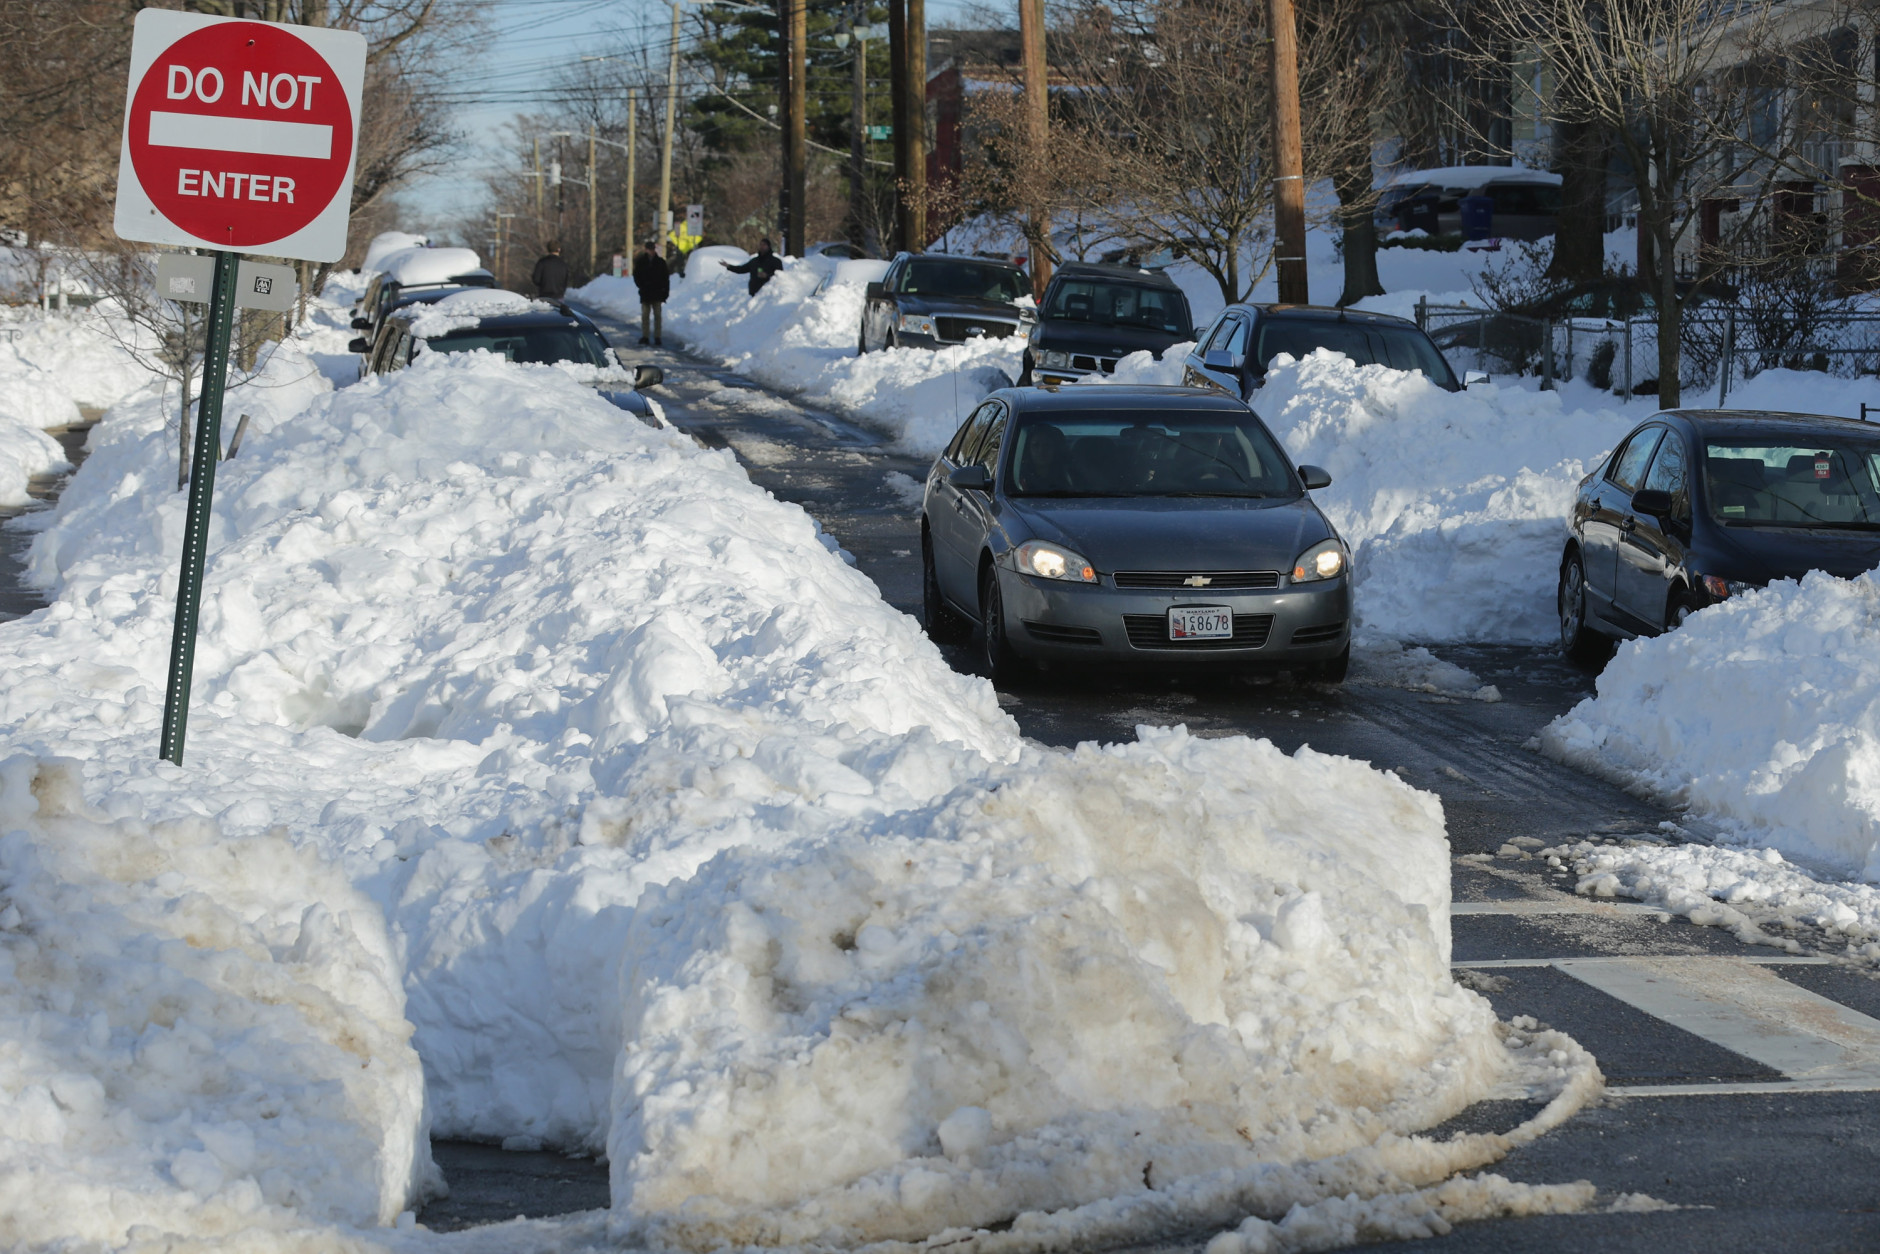 WASHINGTON, DC - JANUARY 25: Vehicle traffic navigates the narrow paths cut through piles of snow in the neighborhood near Catholic Unveristy after Winter Storm Jonas covered the region with more than two feet of snow January 25, 2016 in Washington, United States. The storm hit the East Coast over the weekend, breaking snowfall records, causing 29 storm-related deaths, leaving thousands of homes without power and serious flooding in coastal areas.  (Photo by Chip Somodevilla/Getty Images)